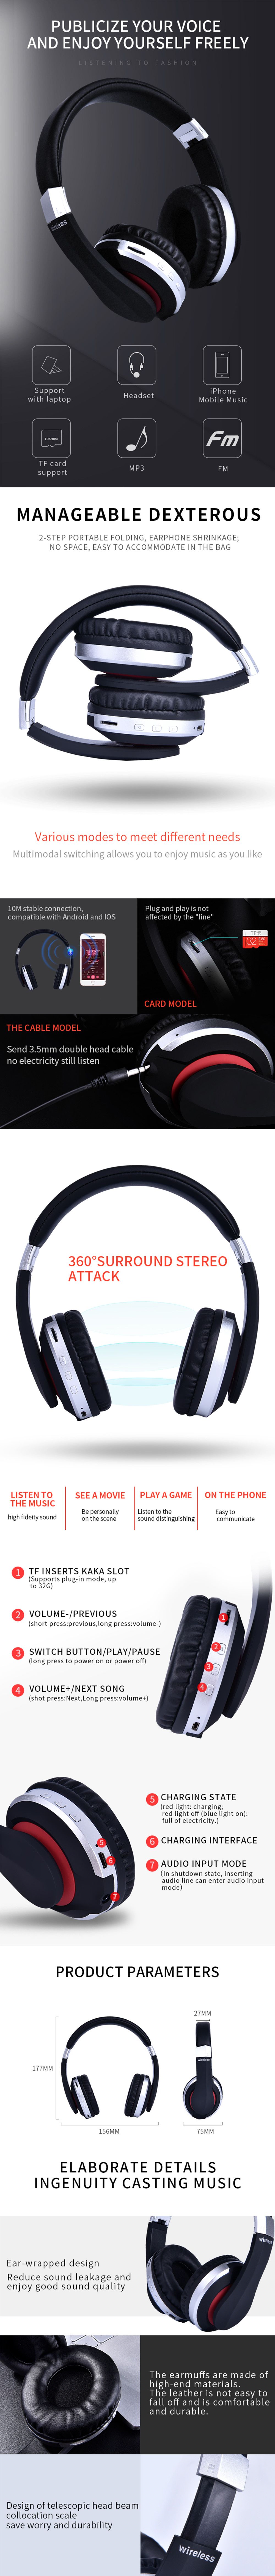 MH7-USB-Wired--bluetooth50-Wireless-24GHz-Omnidirectional-Gaming-Headphone-Foldable-Headset-for-Comp-1575488